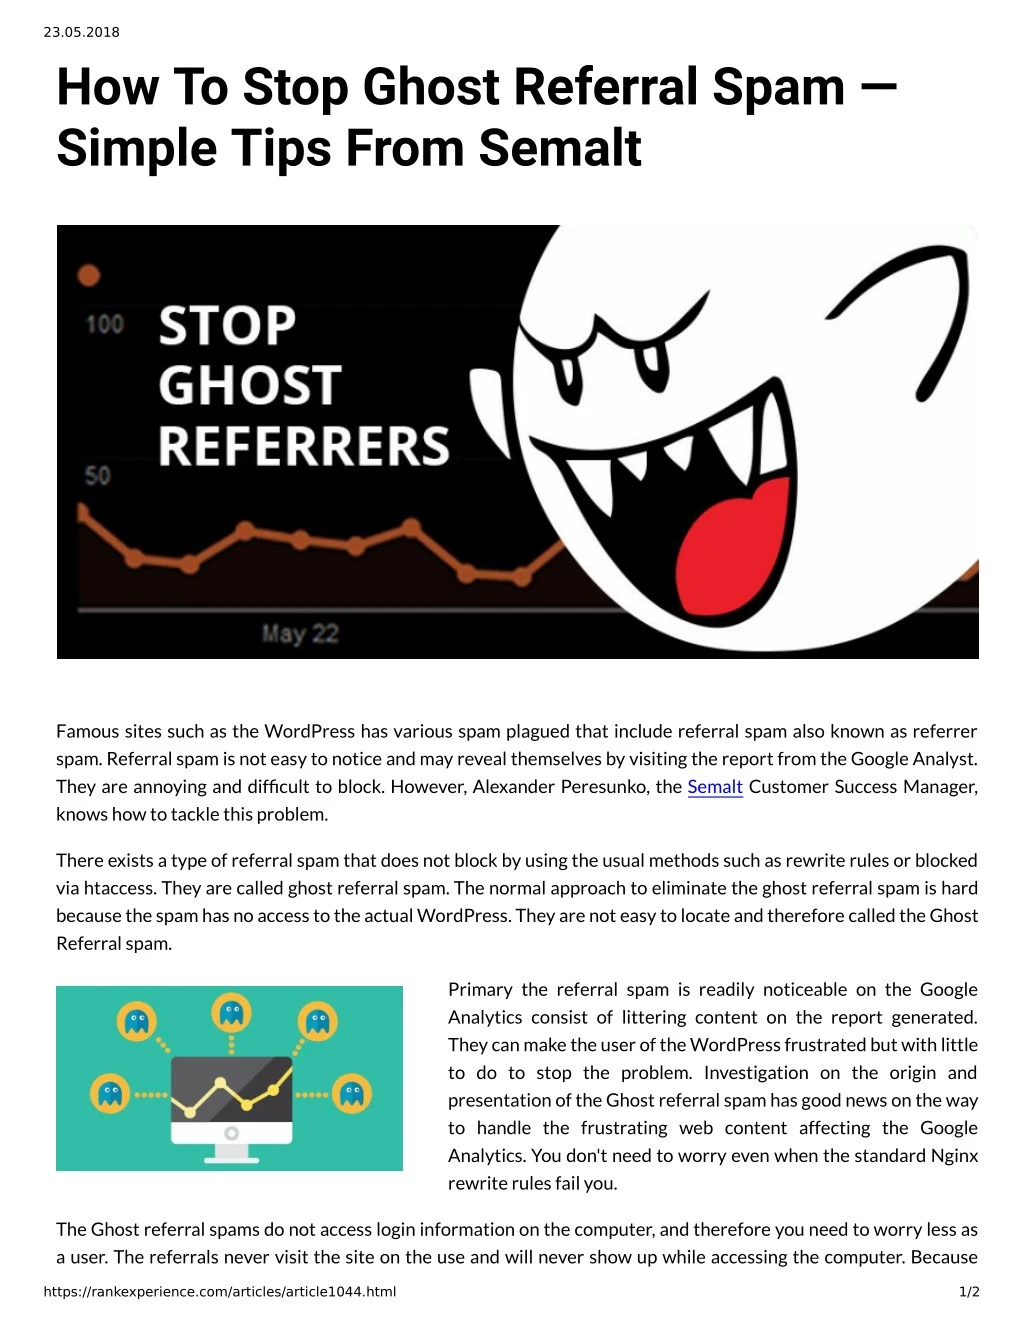 23 05 2018 how to stop ghost referral spam simple